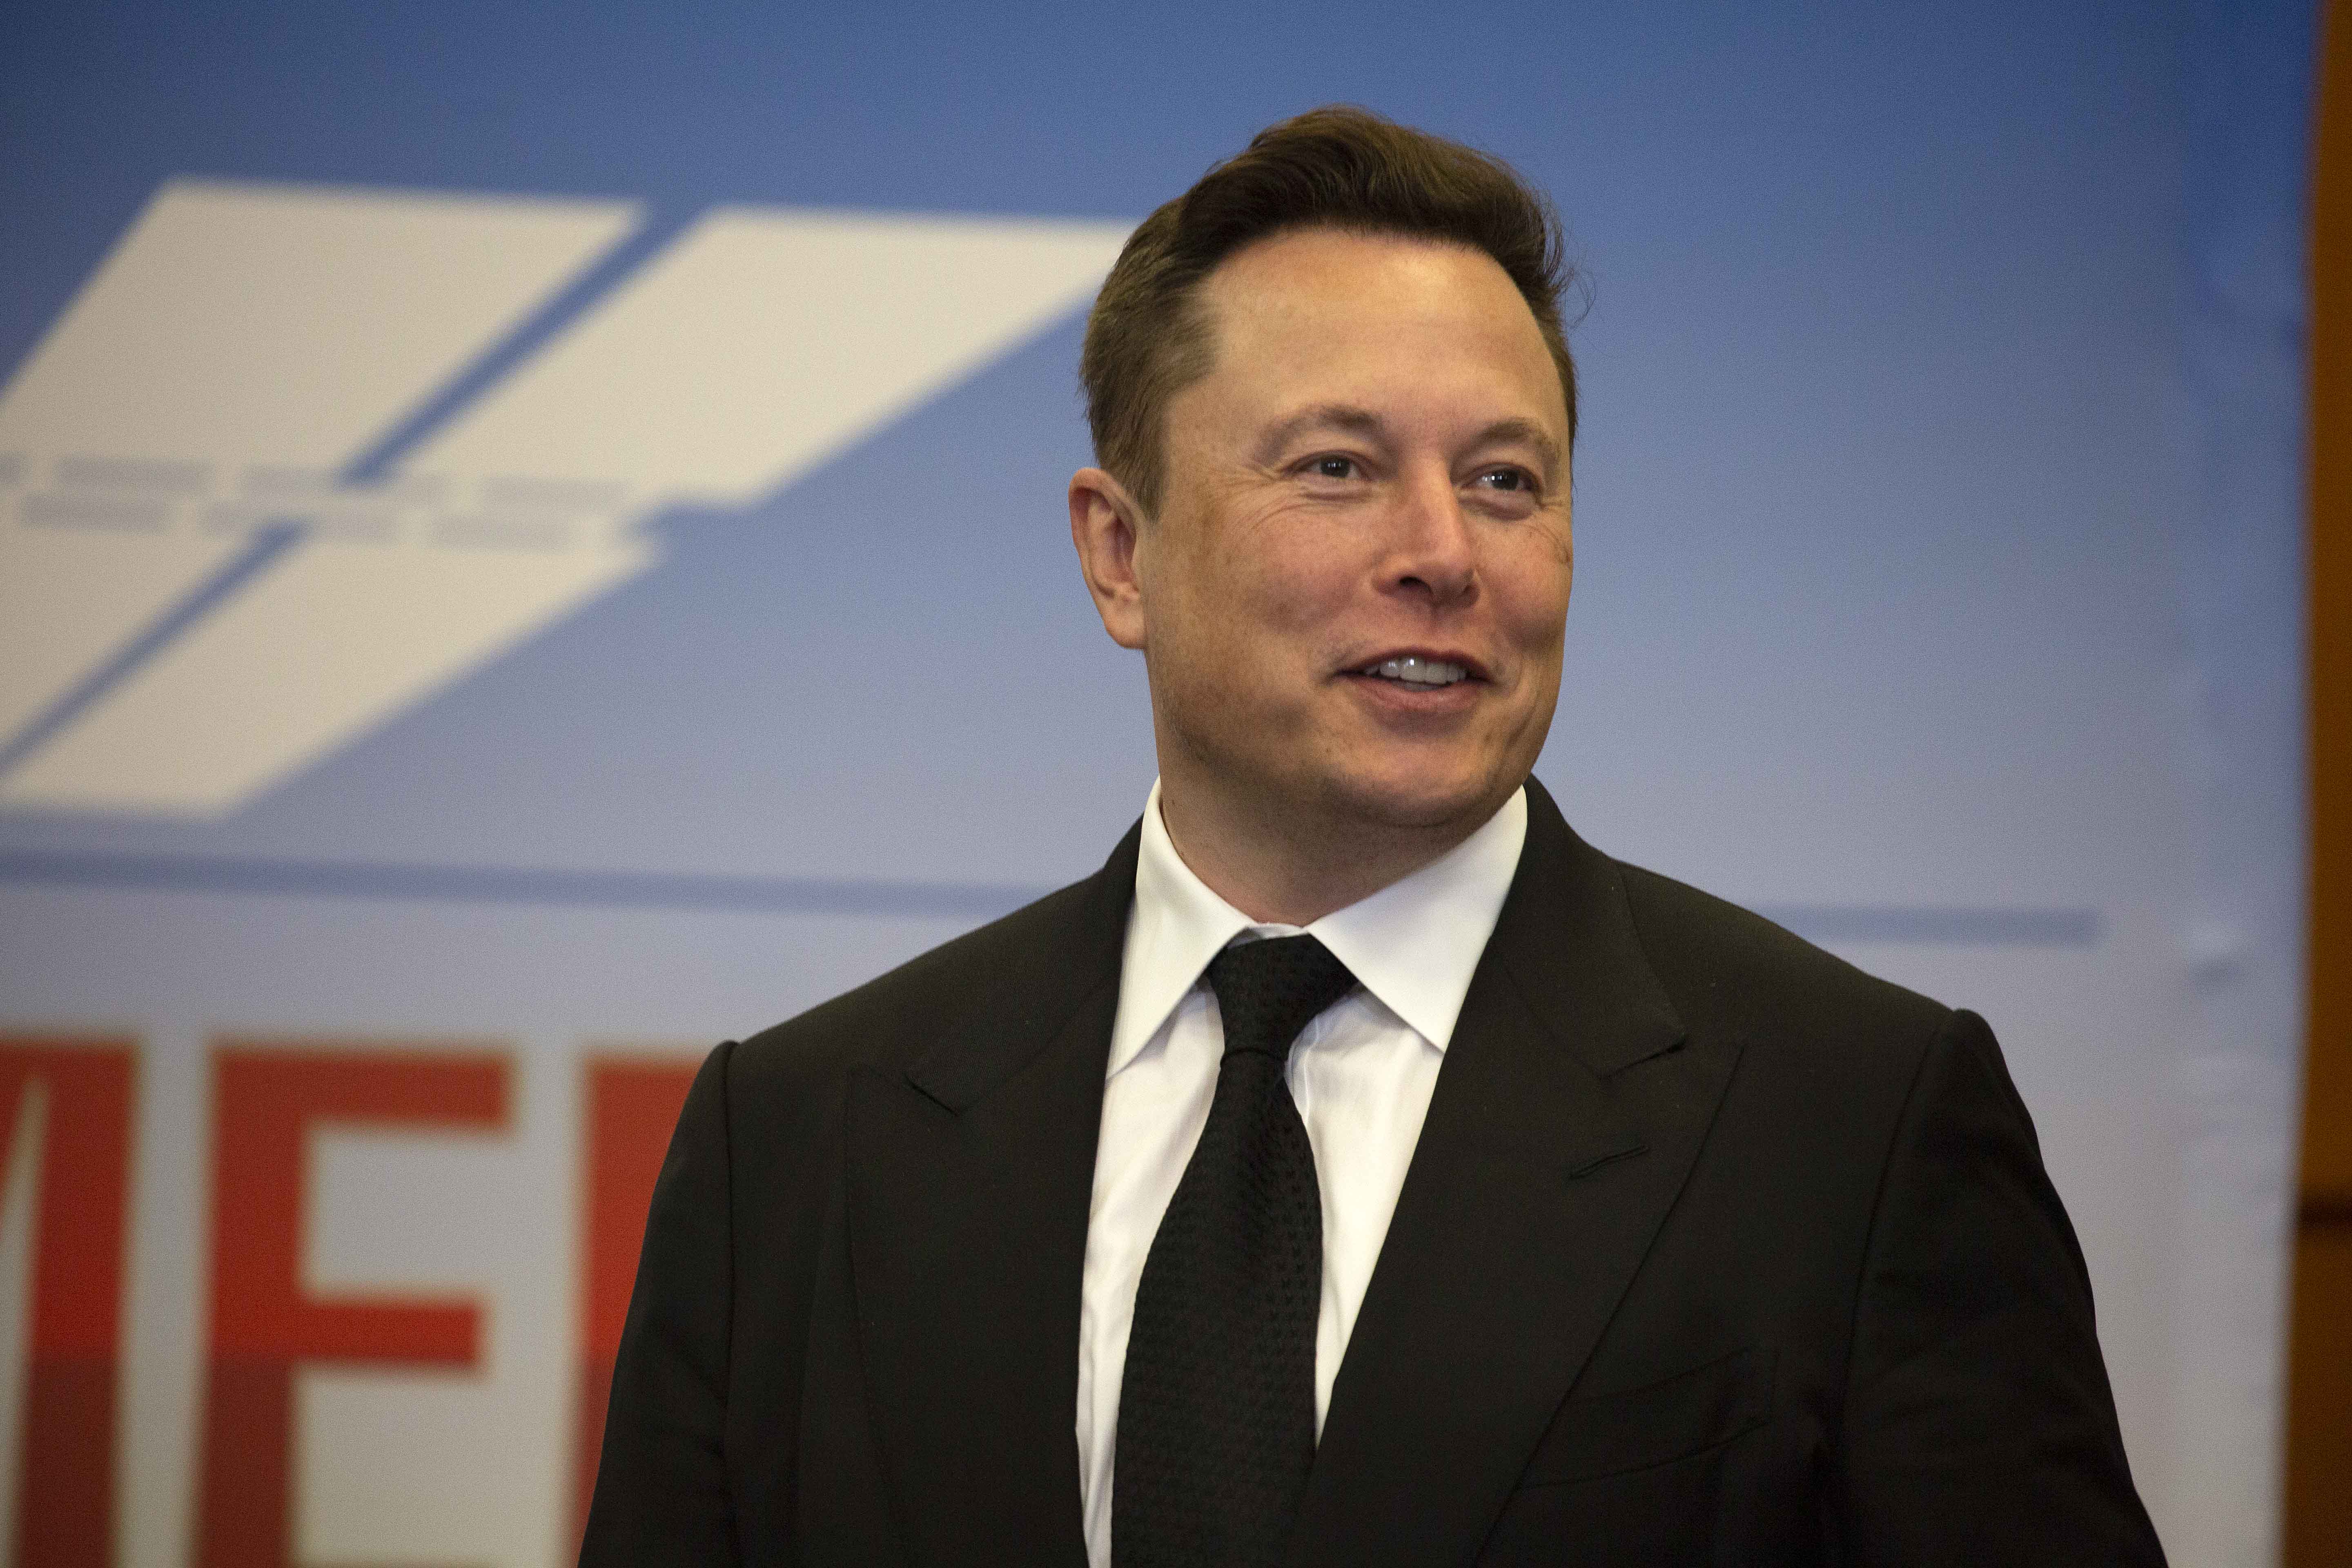 Elon Musk Calls Twitter’s Decision To Ban Donald Trump A “Mistake”